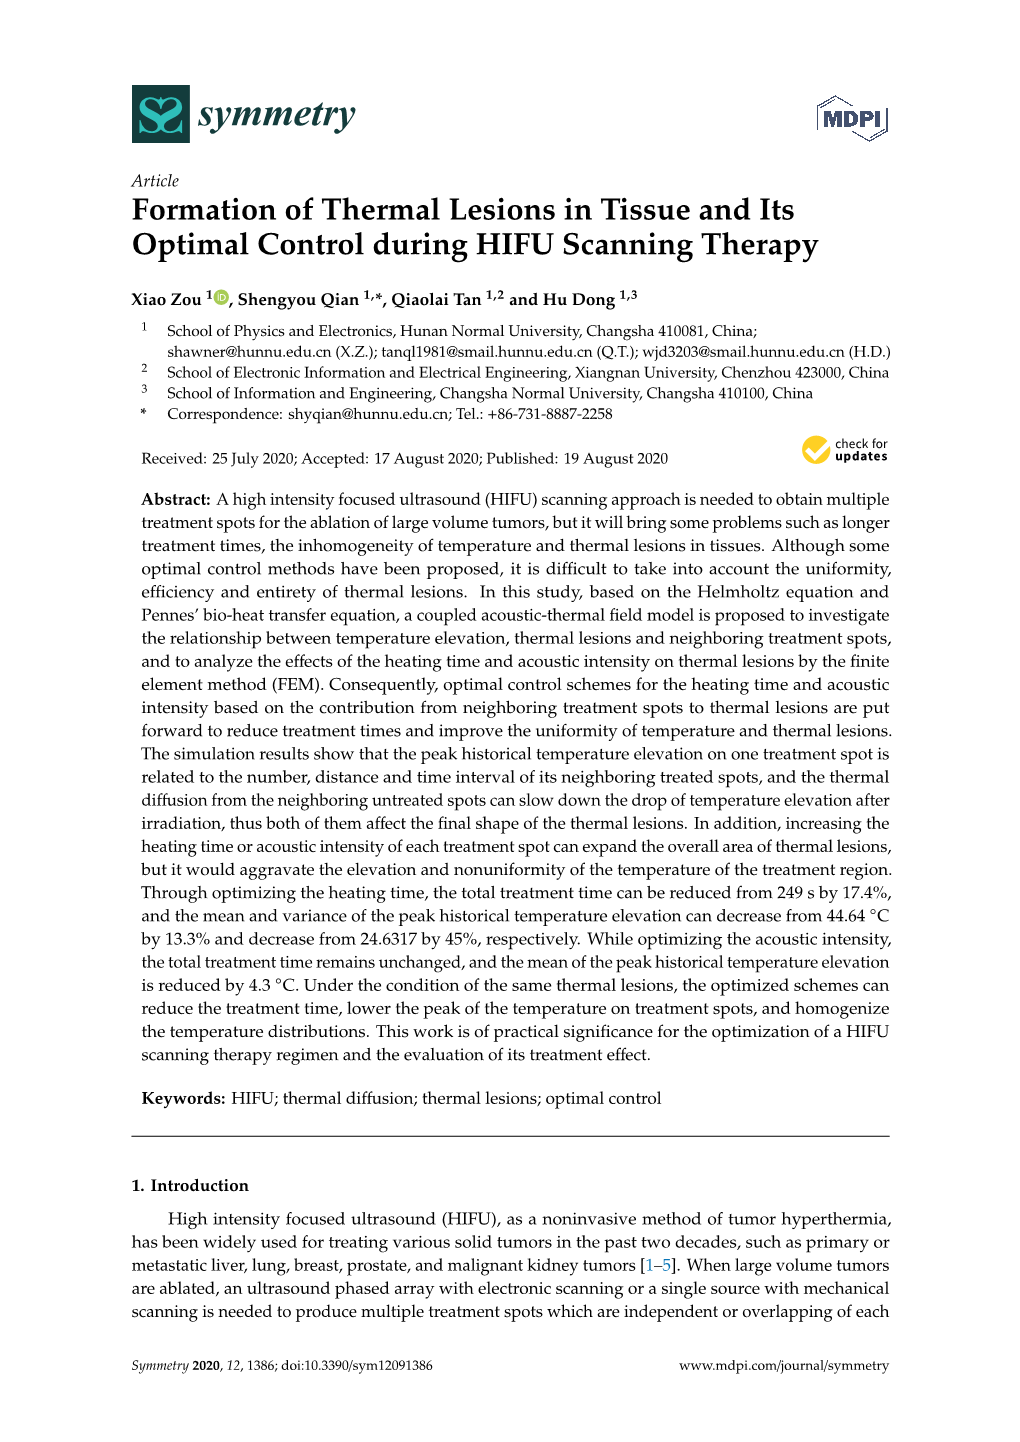 Formation of Thermal Lesions in Tissue and Its Optimal Control During HIFU Scanning Therapy